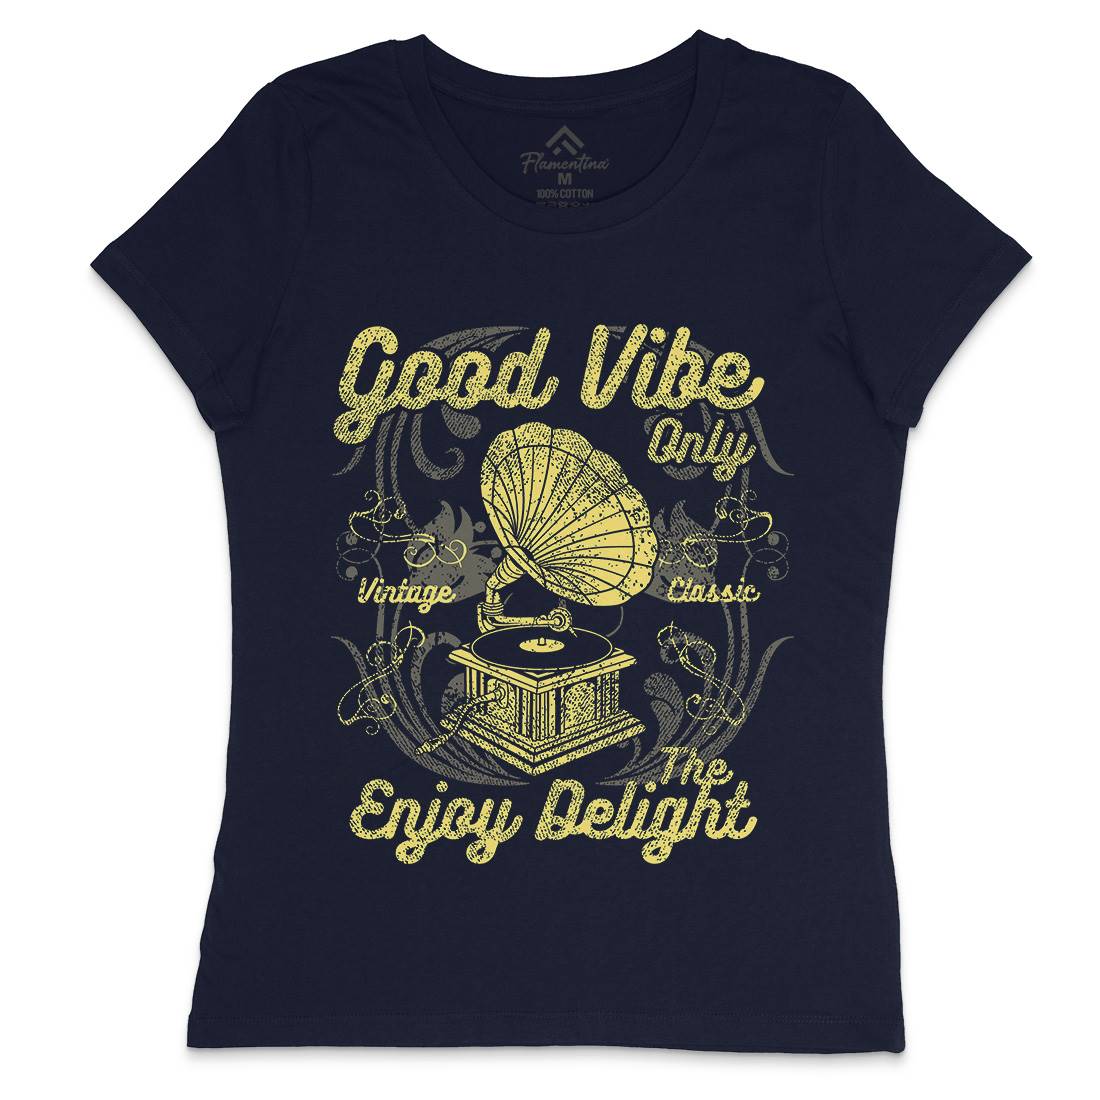 Good Vibe Only Womens Crew Neck T-Shirt Music A059